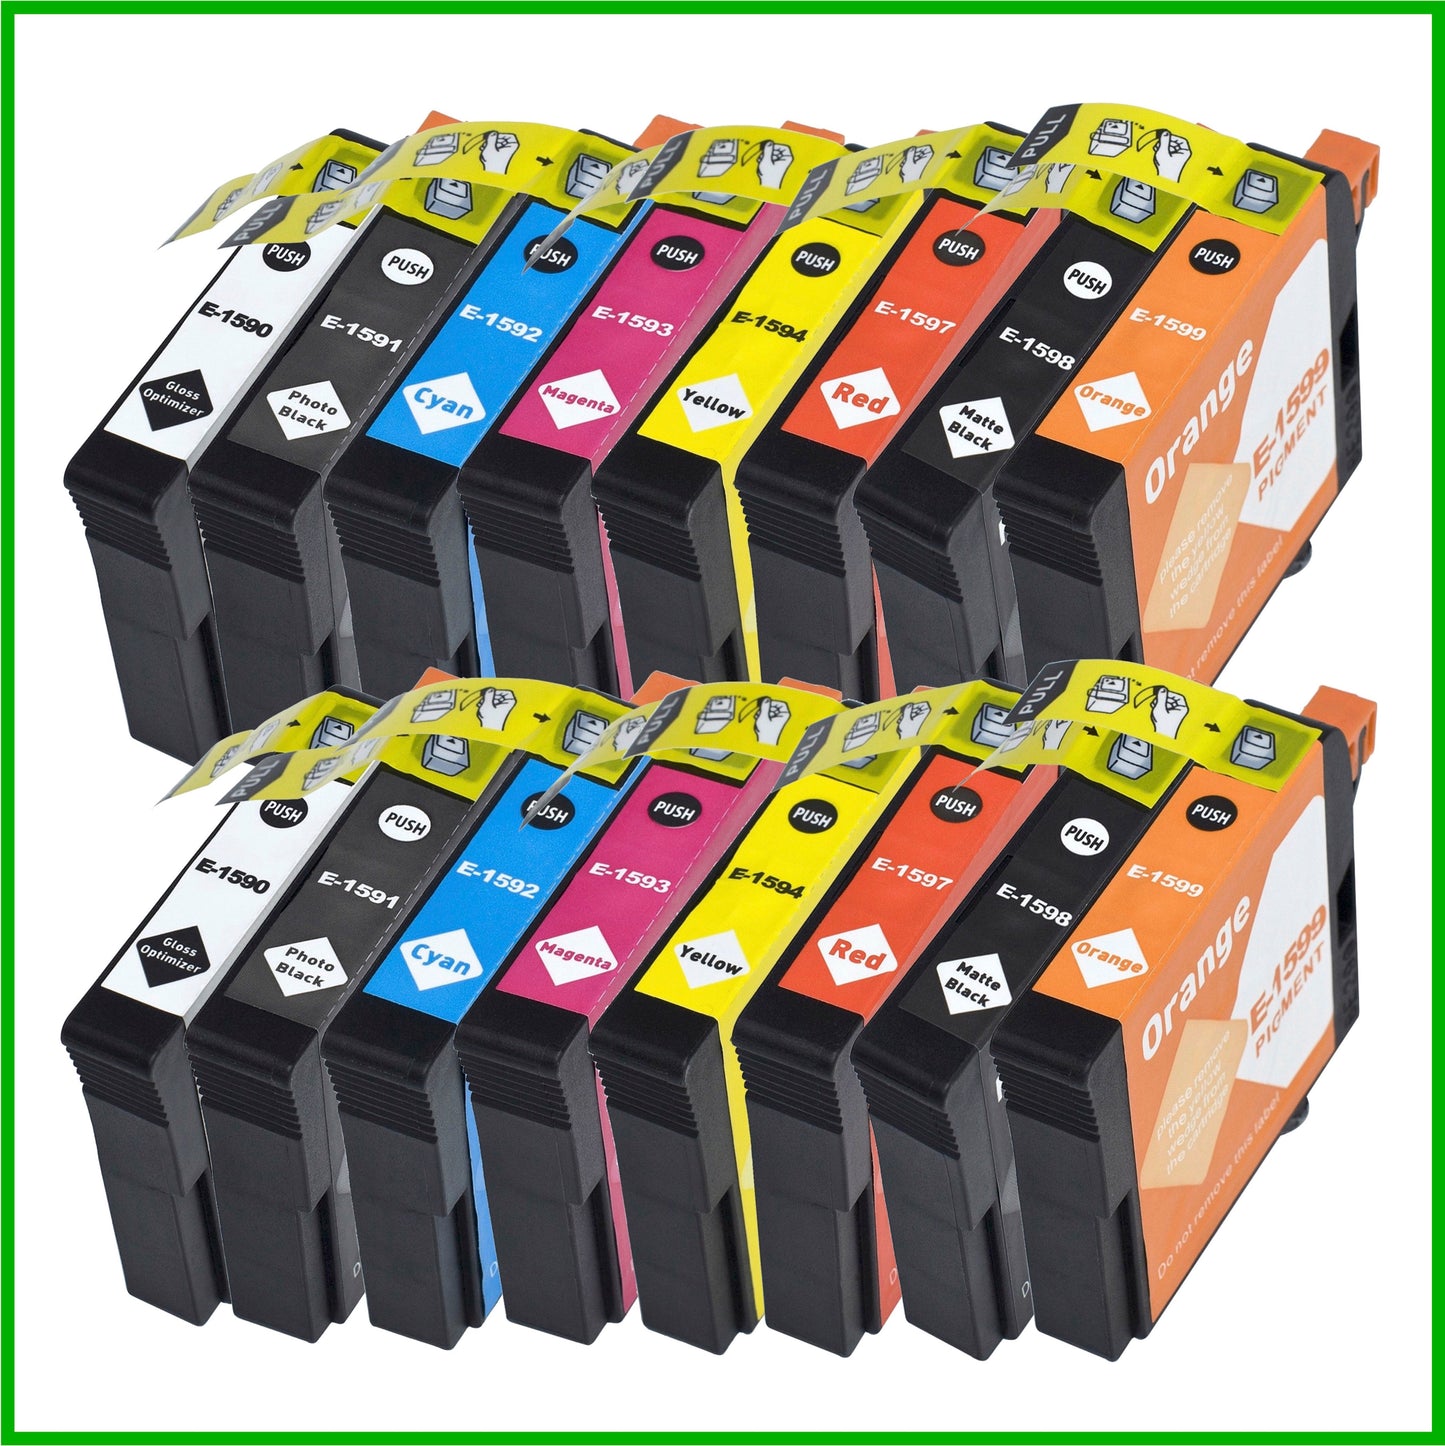 Compatible Epson 1590-9 Multipack x2 T159 Ink Cartridge (Kingfisher)